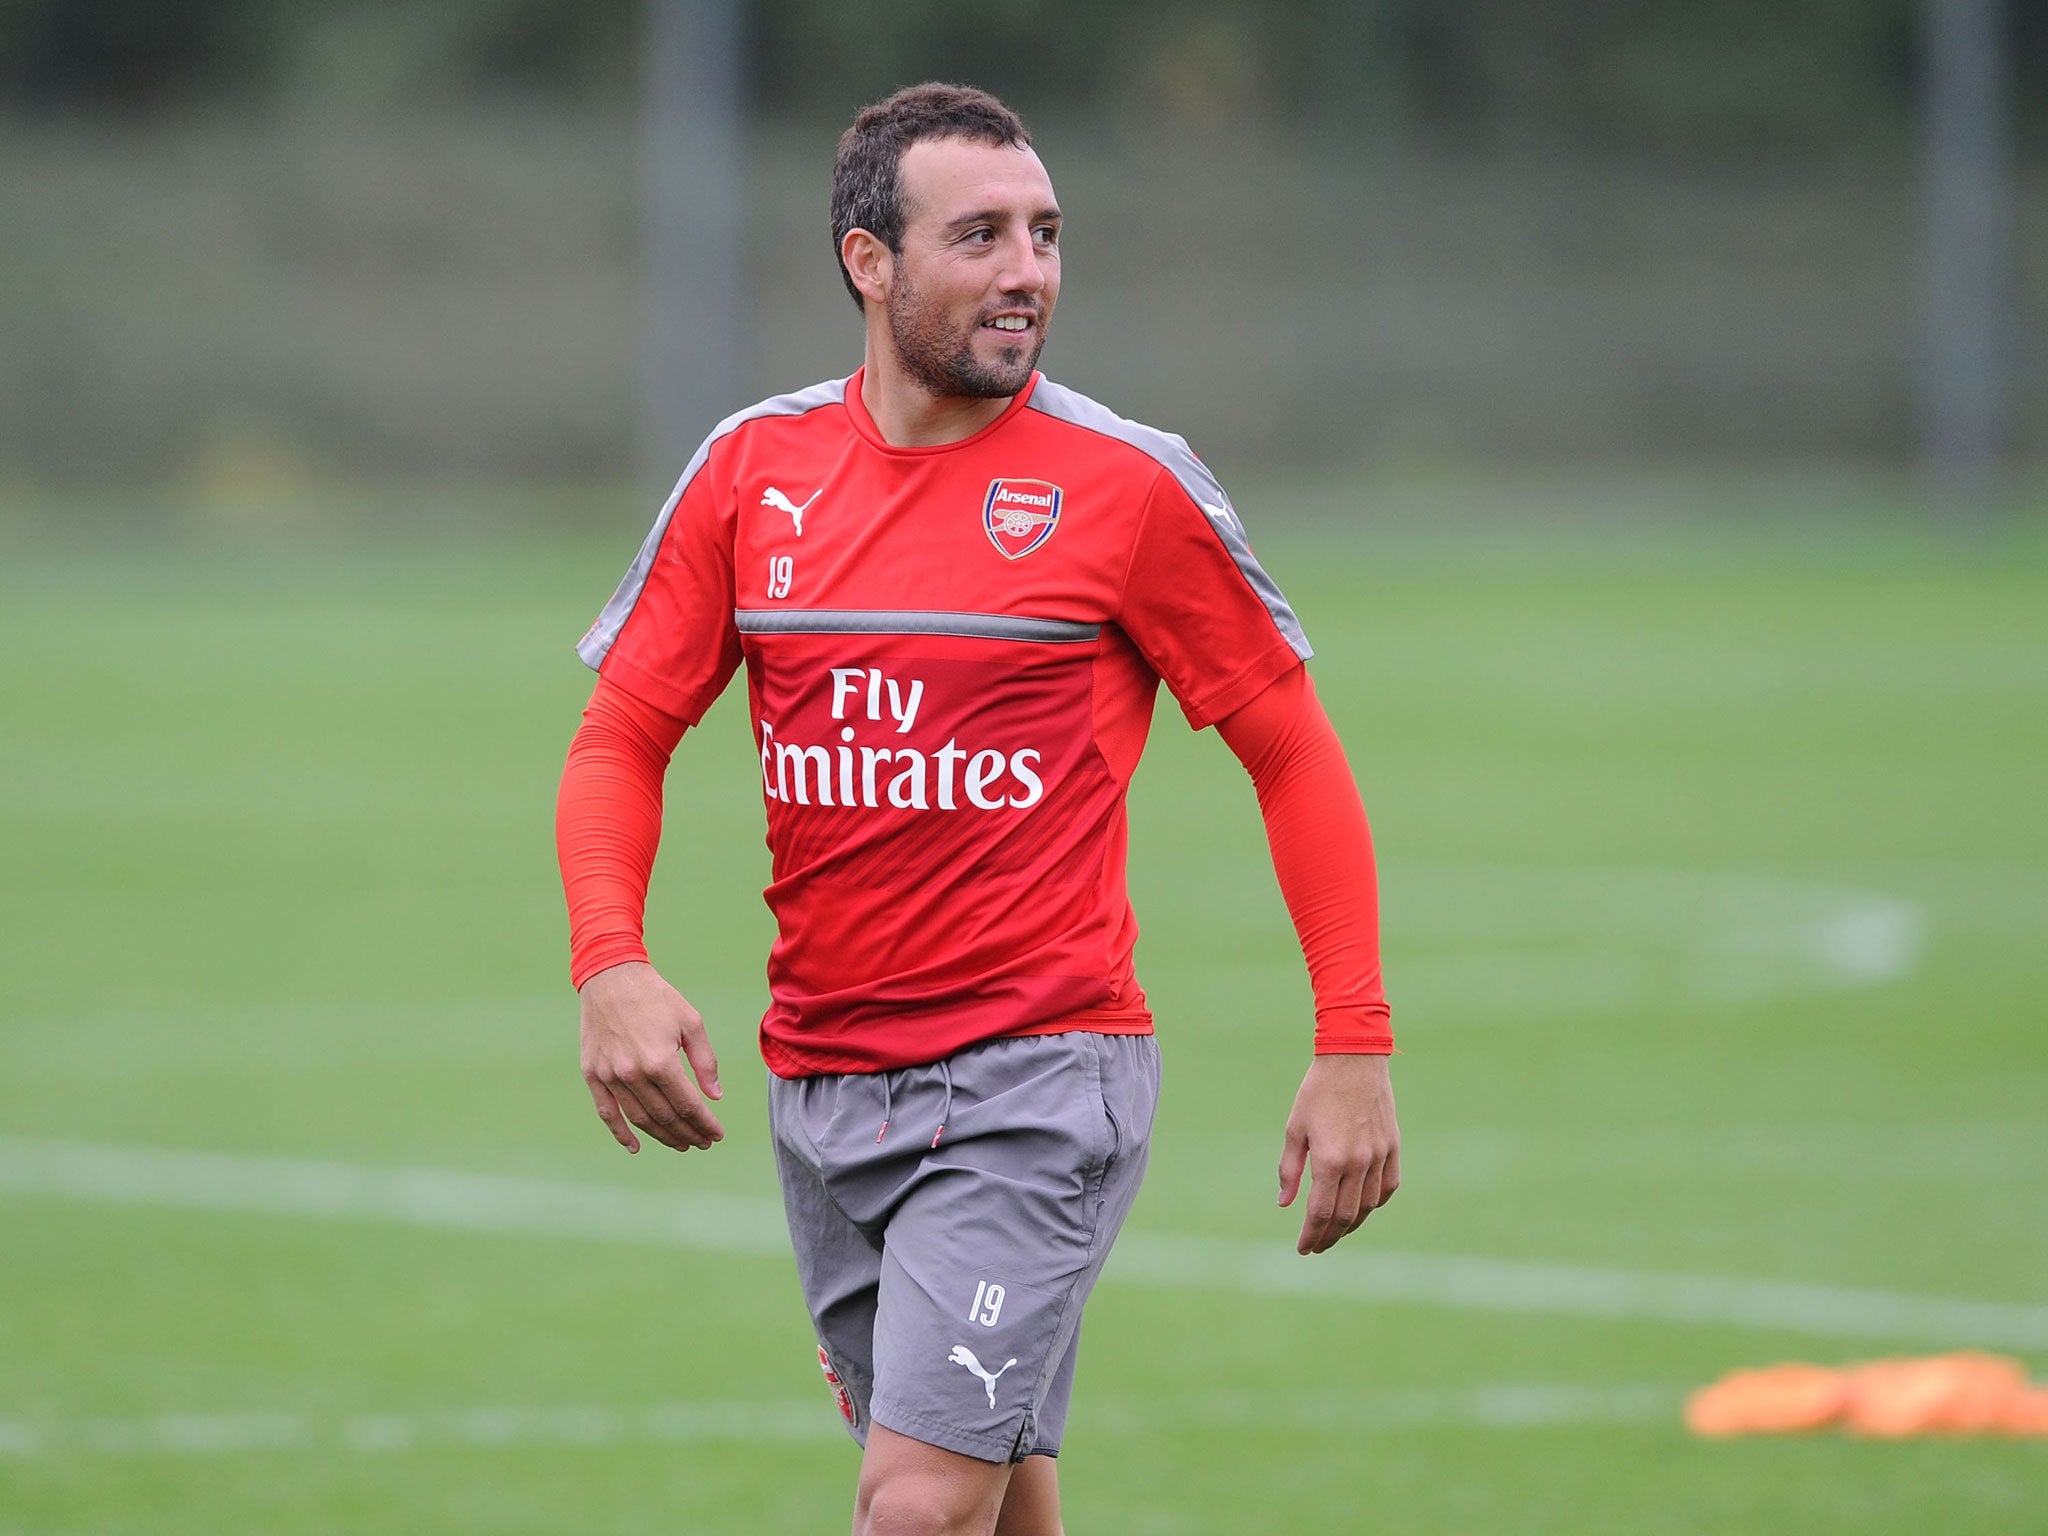 Santi Cazorla does not know when he will return for Arsenal and is likely to miss the start of the season